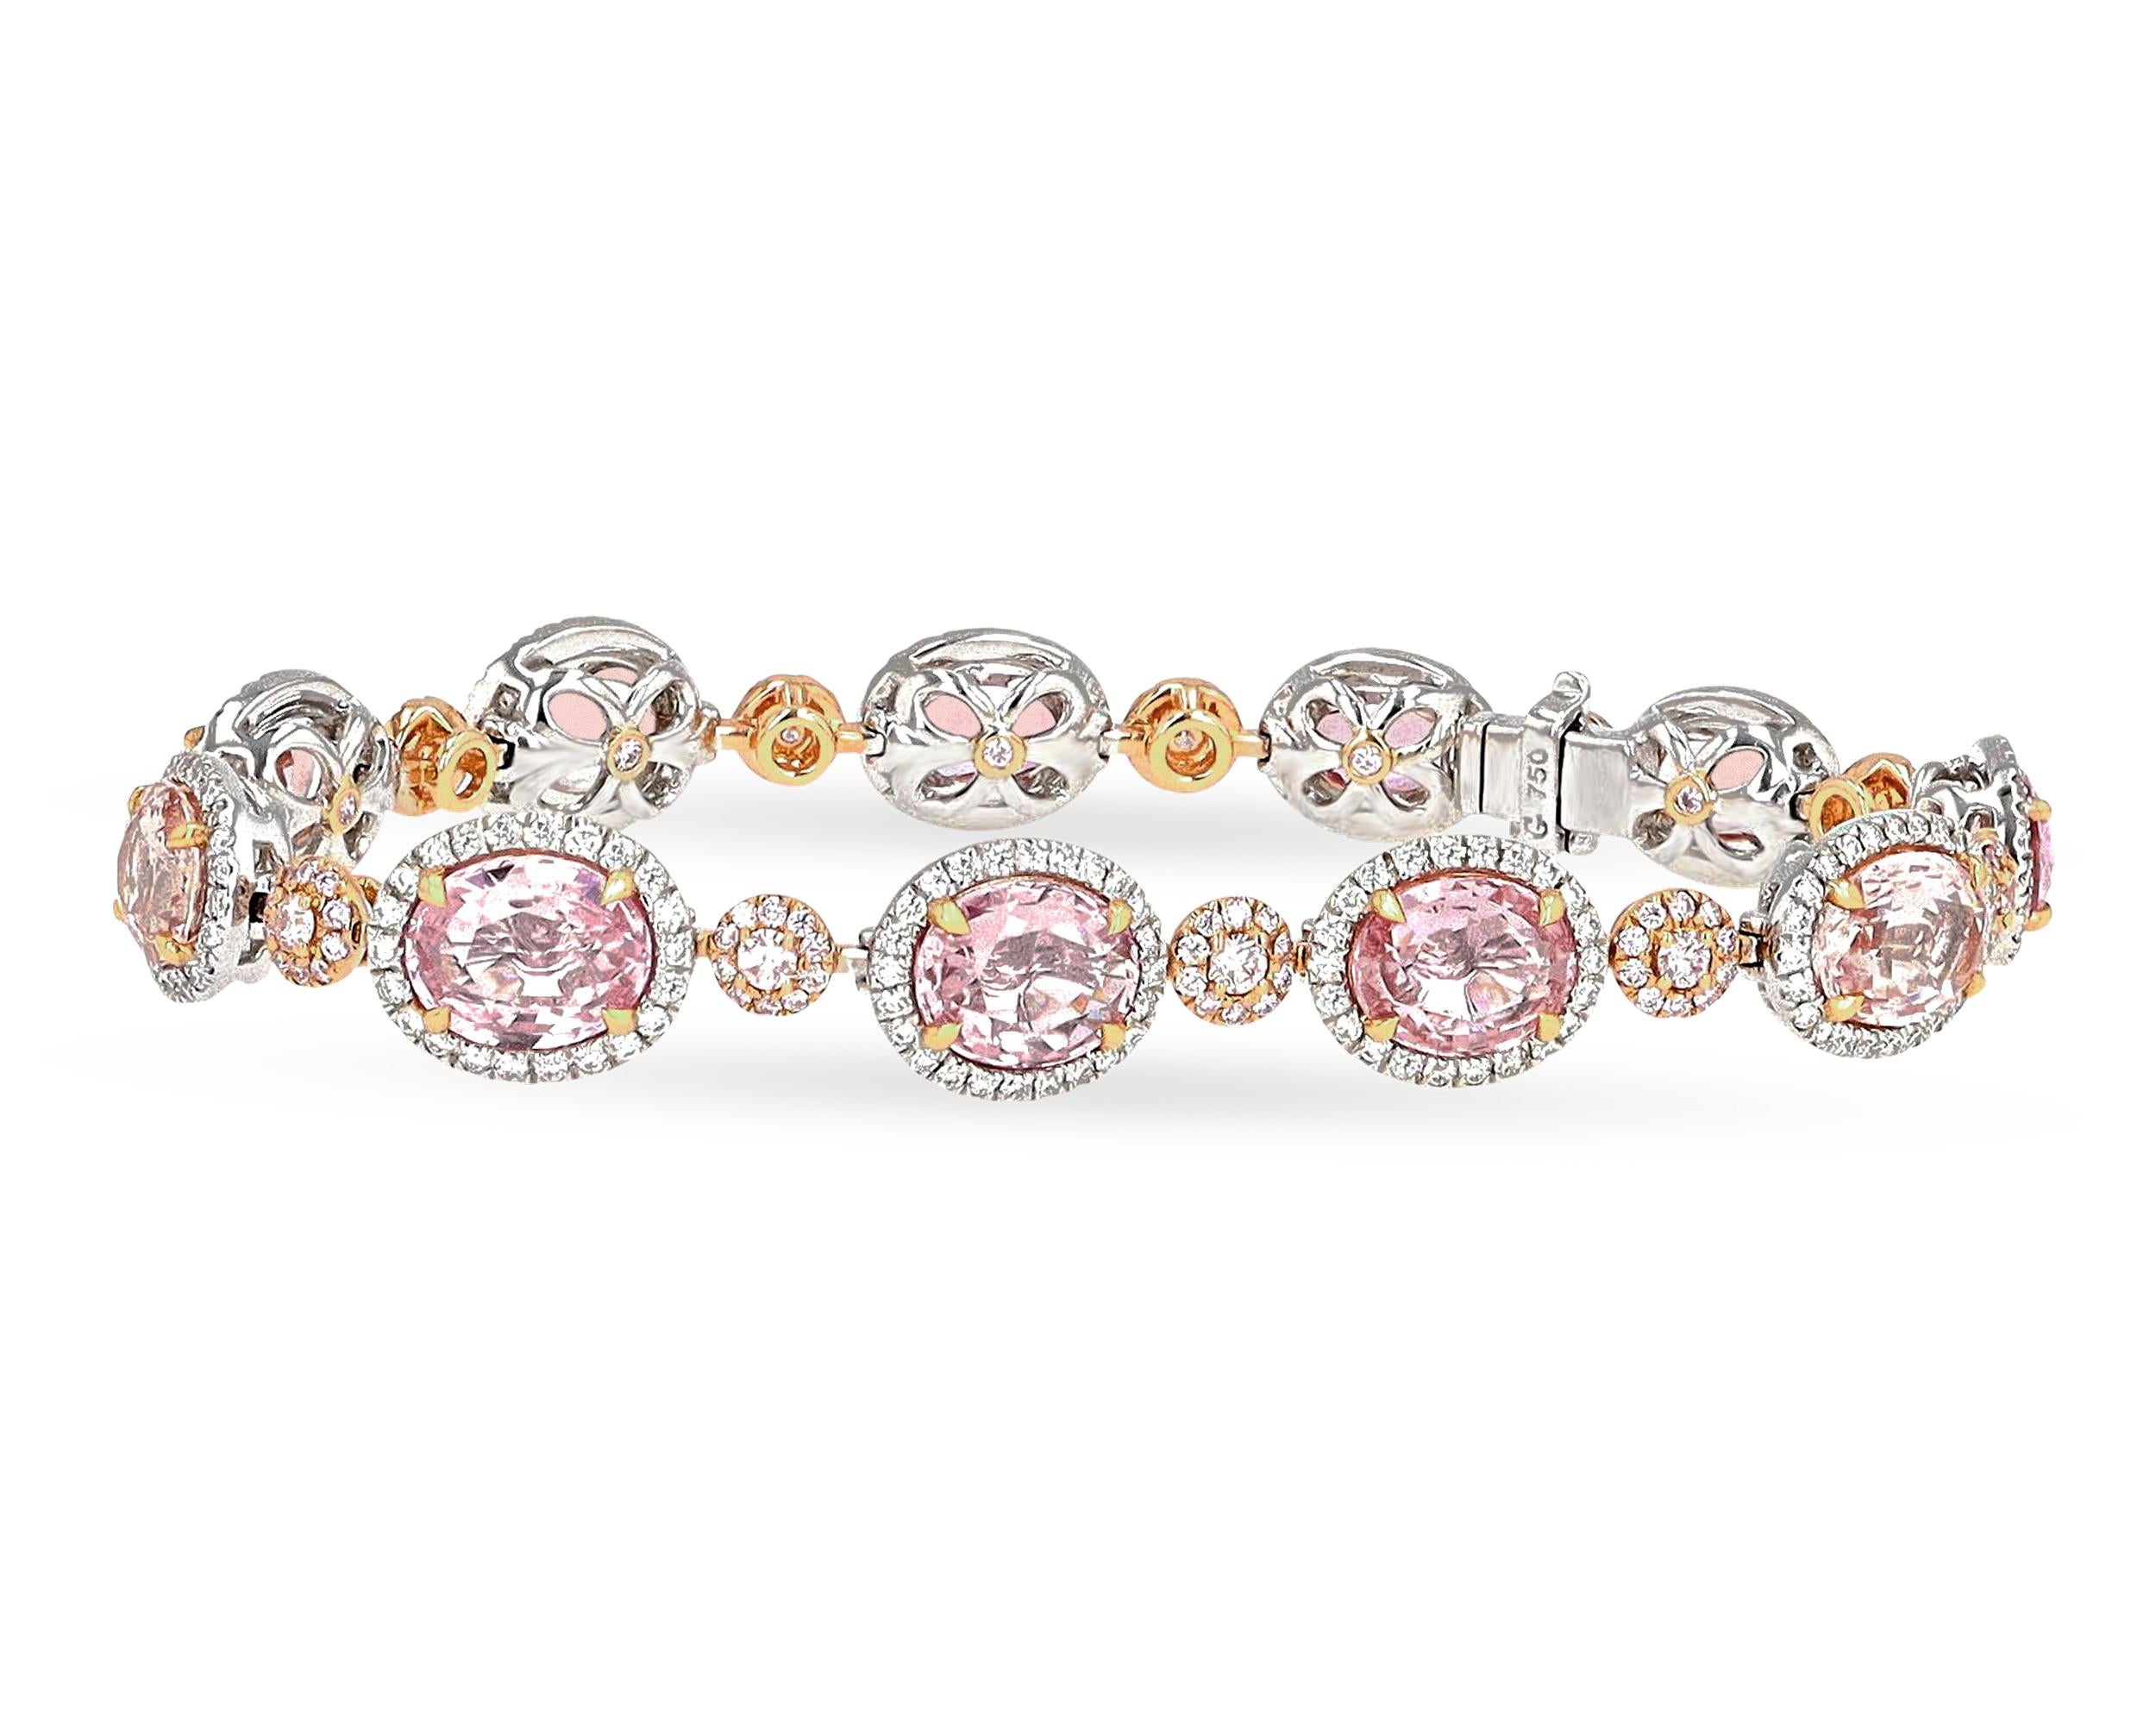 Eleven of the rarest of all sapphires - the padparadscha sapphire - dazzle in this dramatic bracelet. Totaling 16.48 carats, the gems exhibit the superb pastel orangy-pink color that makes these stones so highly coveted. The sapphires are certified